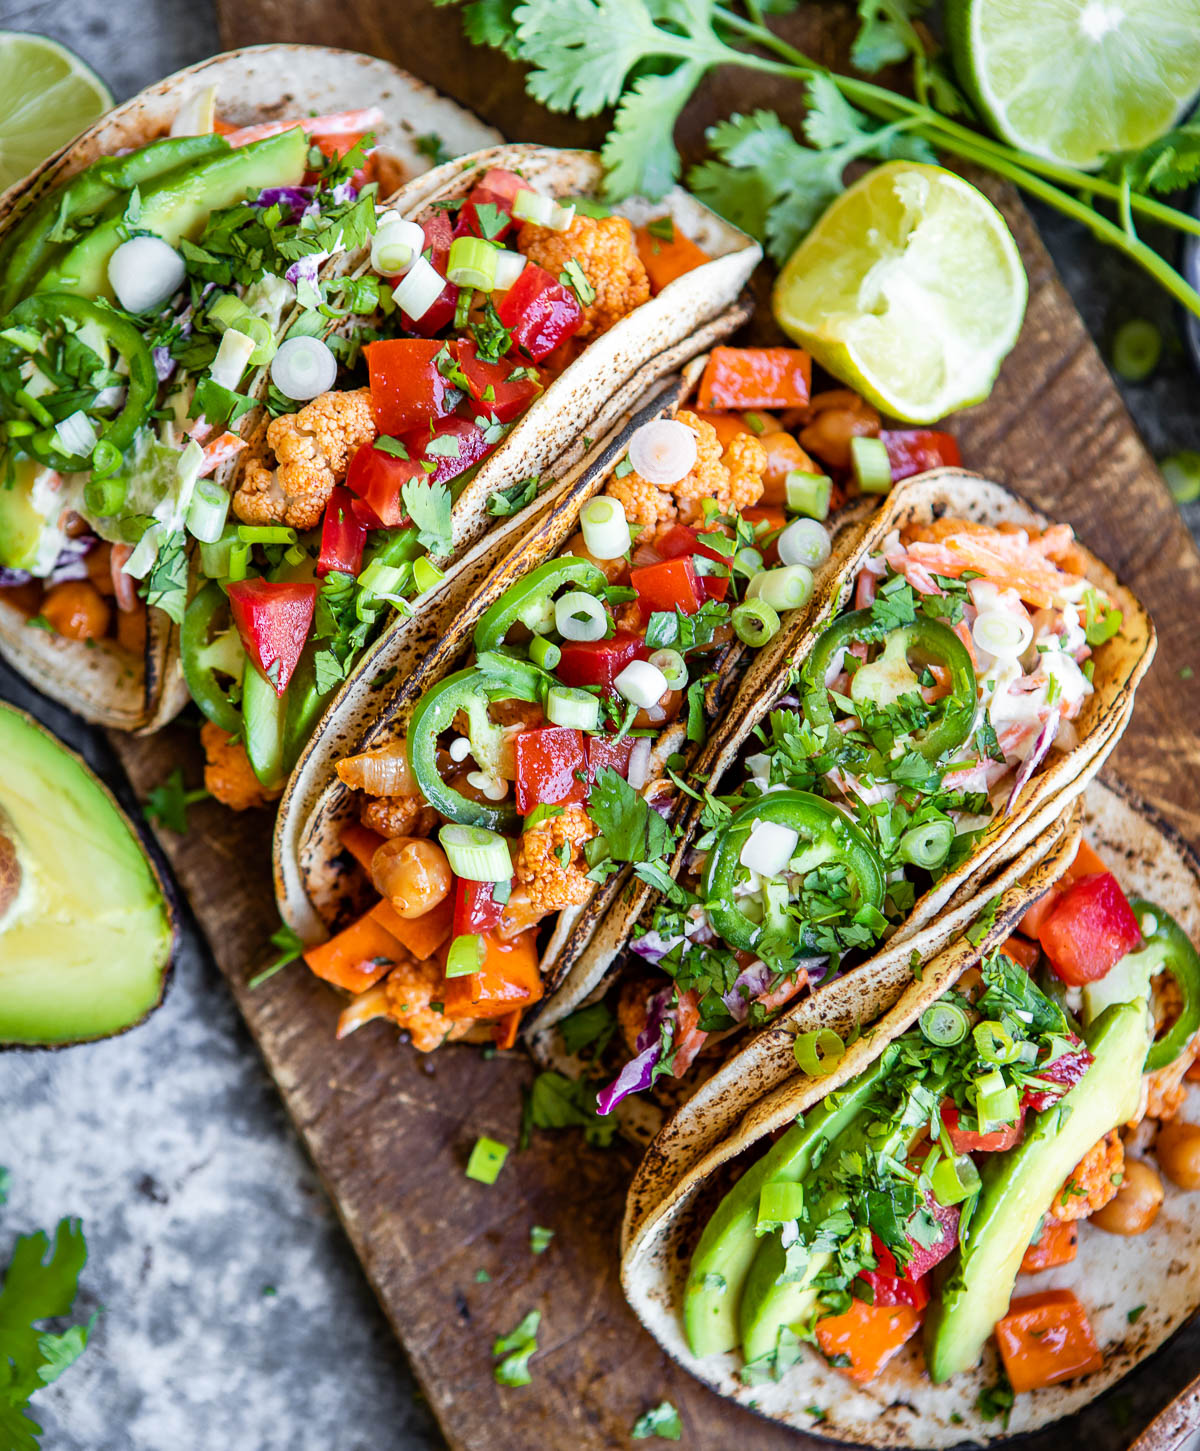 Cauliflower Tacos from the Vegetarian Meal Plan